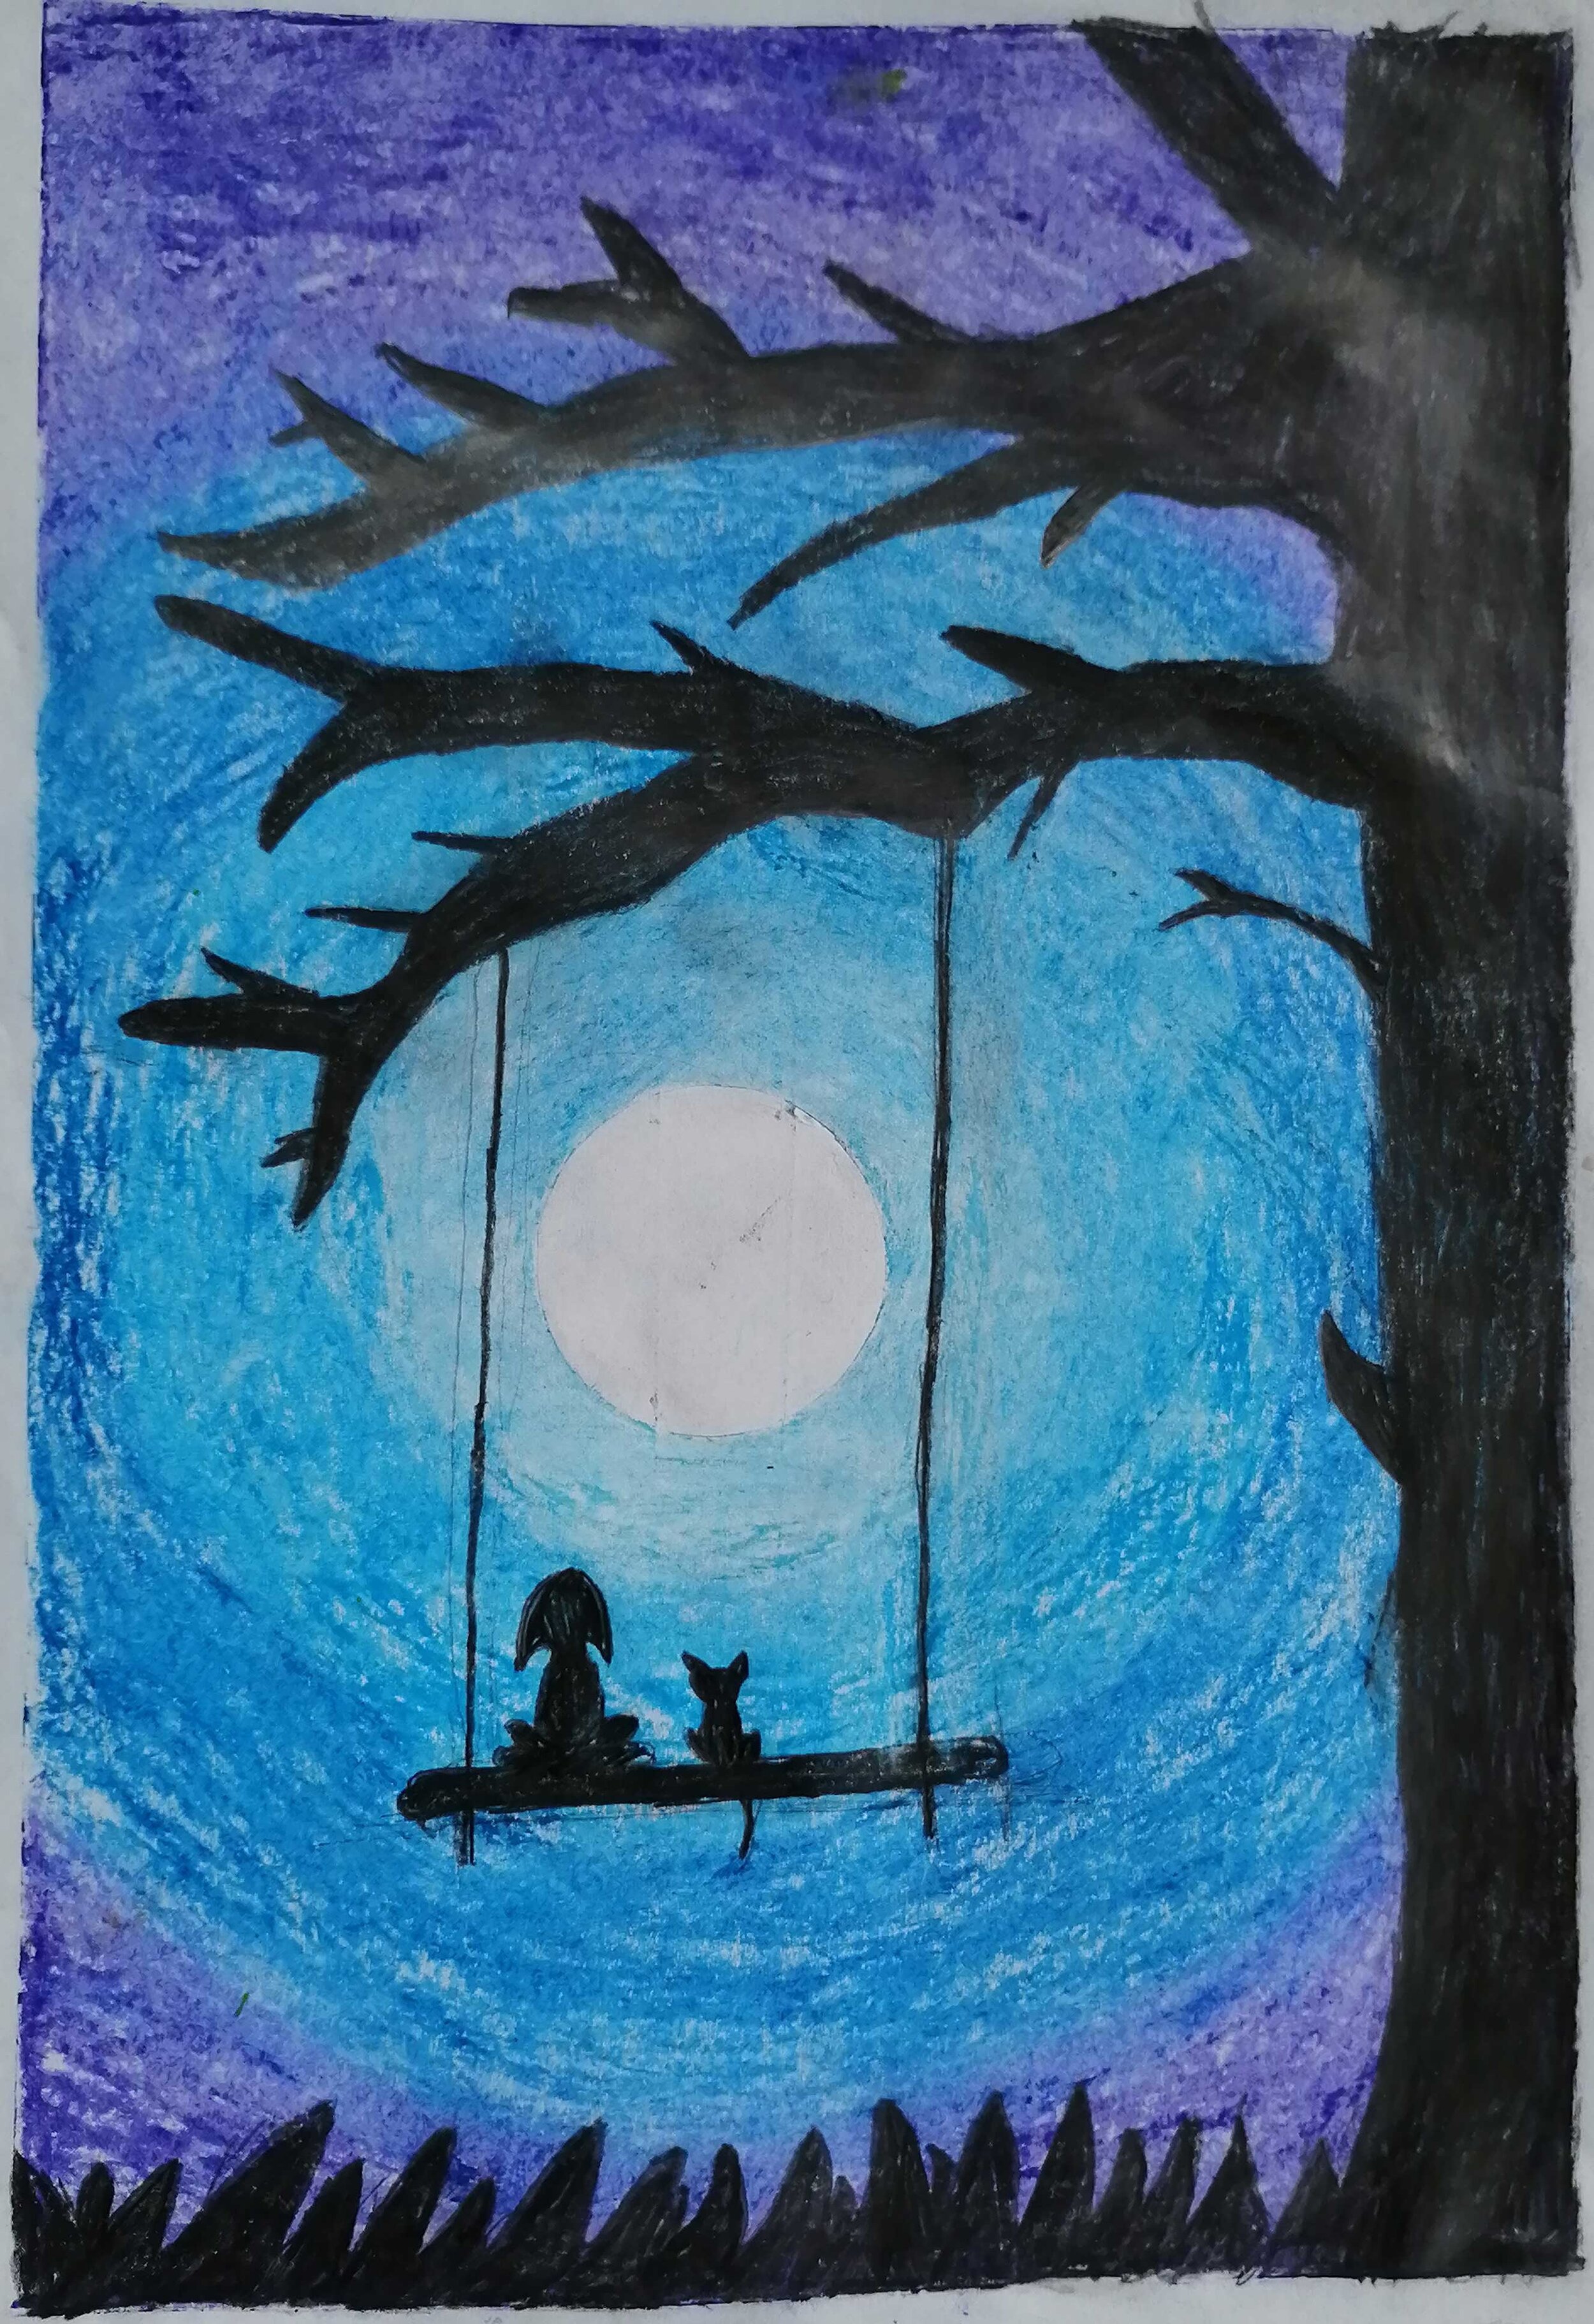 Swinging in the moonlight by Emily Dawson age 8